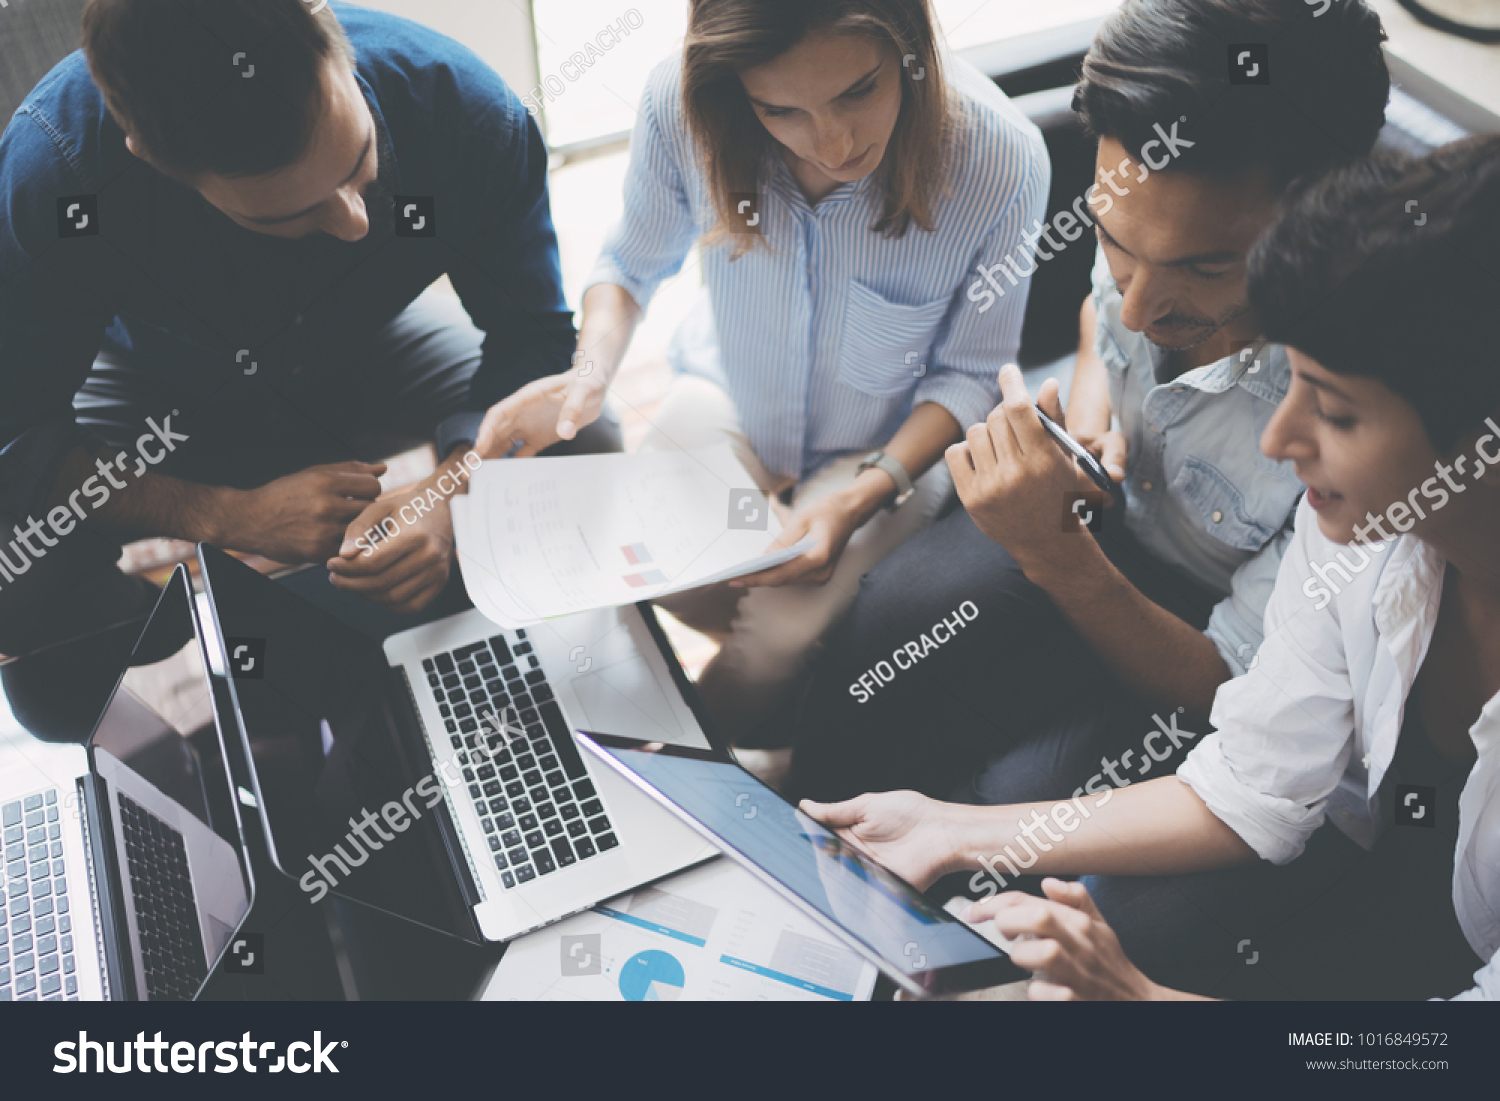 Business meeting concept.Coworkers team working new startup project at office.Analyze business documents, laptop on table.Blurred background.Horizontal. #1016849572